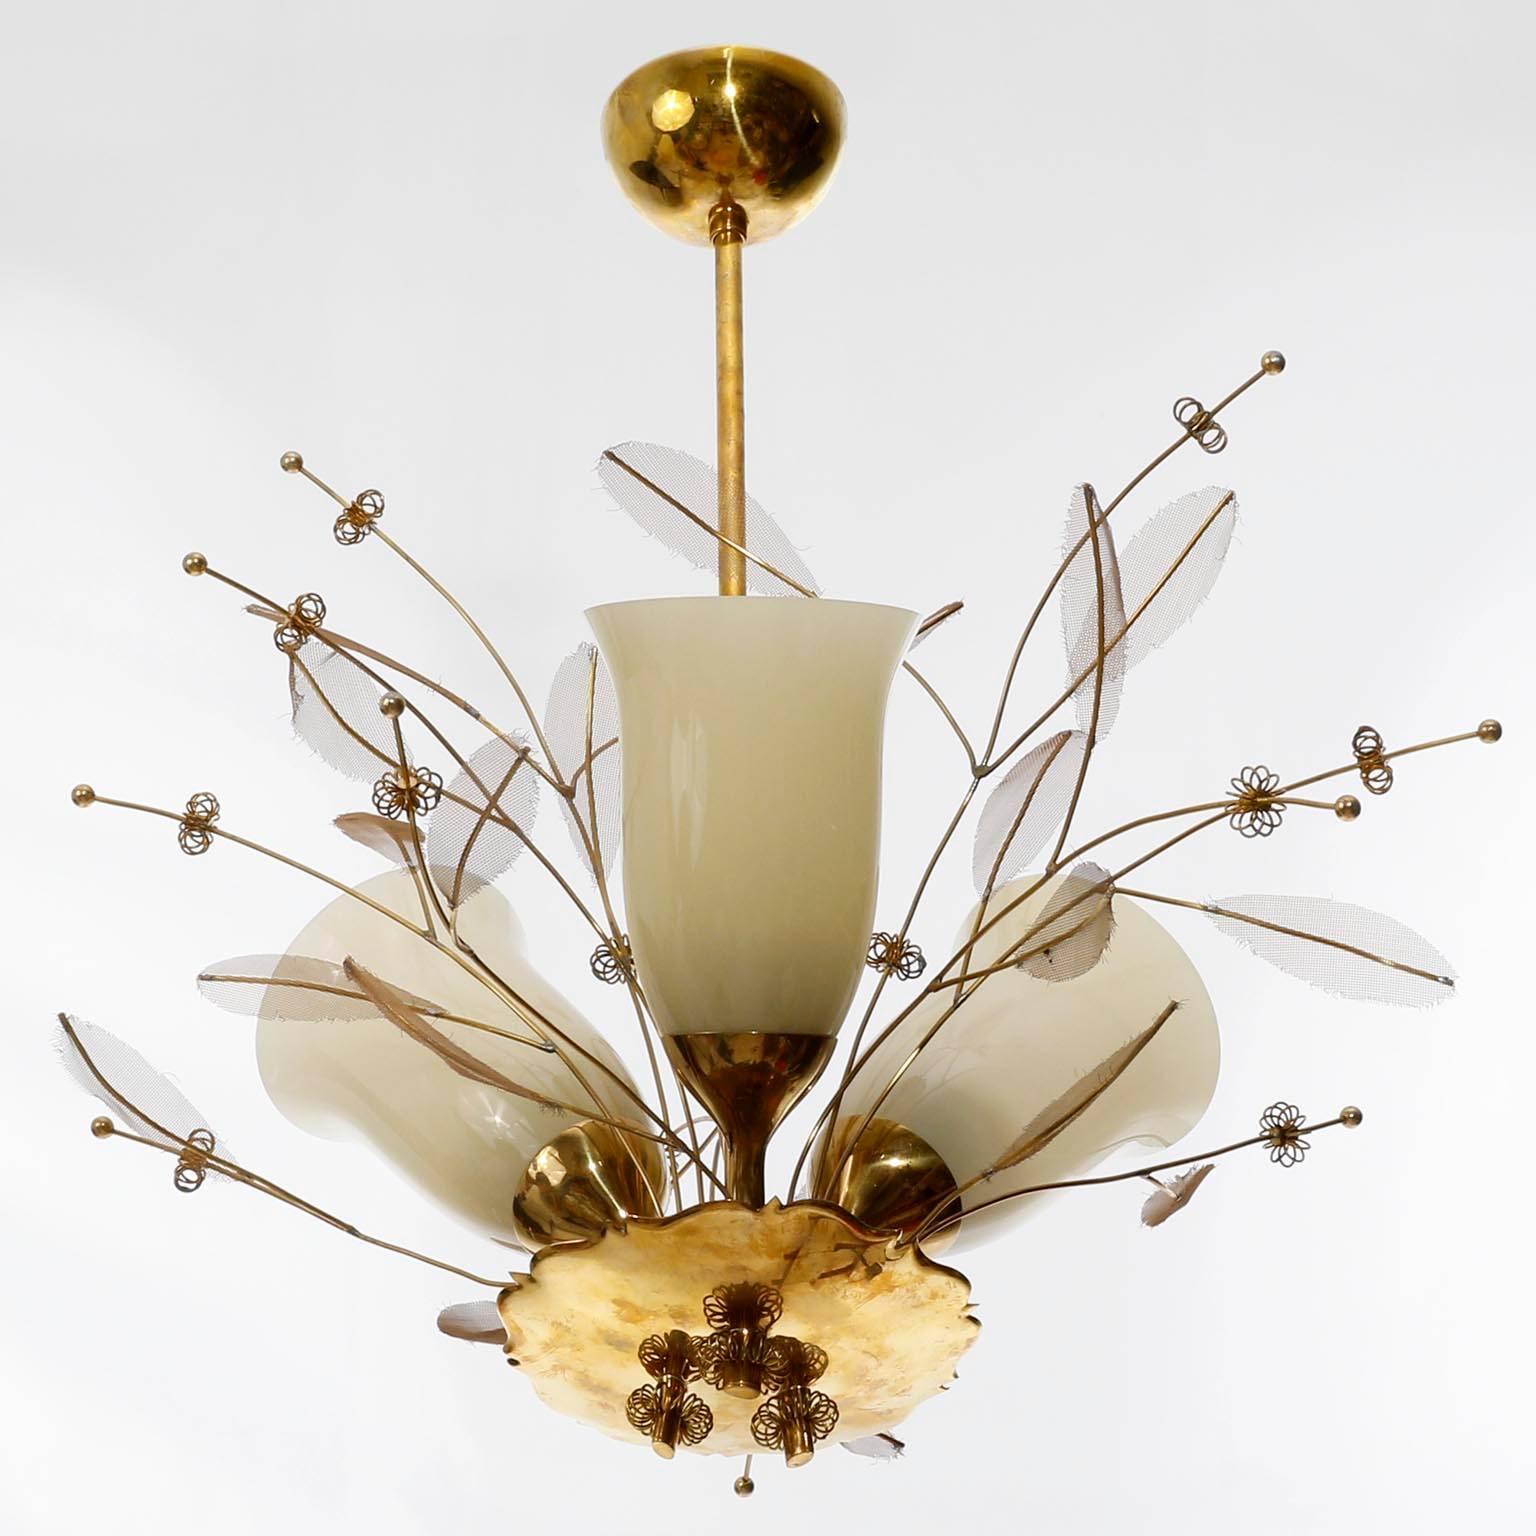 A rare ceiling light fixture model 9029 designed by Paavo Tynell and manufactured by Taito in Finland in 1950s.
The lamp is made of brass with floral decorations and three original opal glass shades in a champagne tone.
This wonderful chandelier